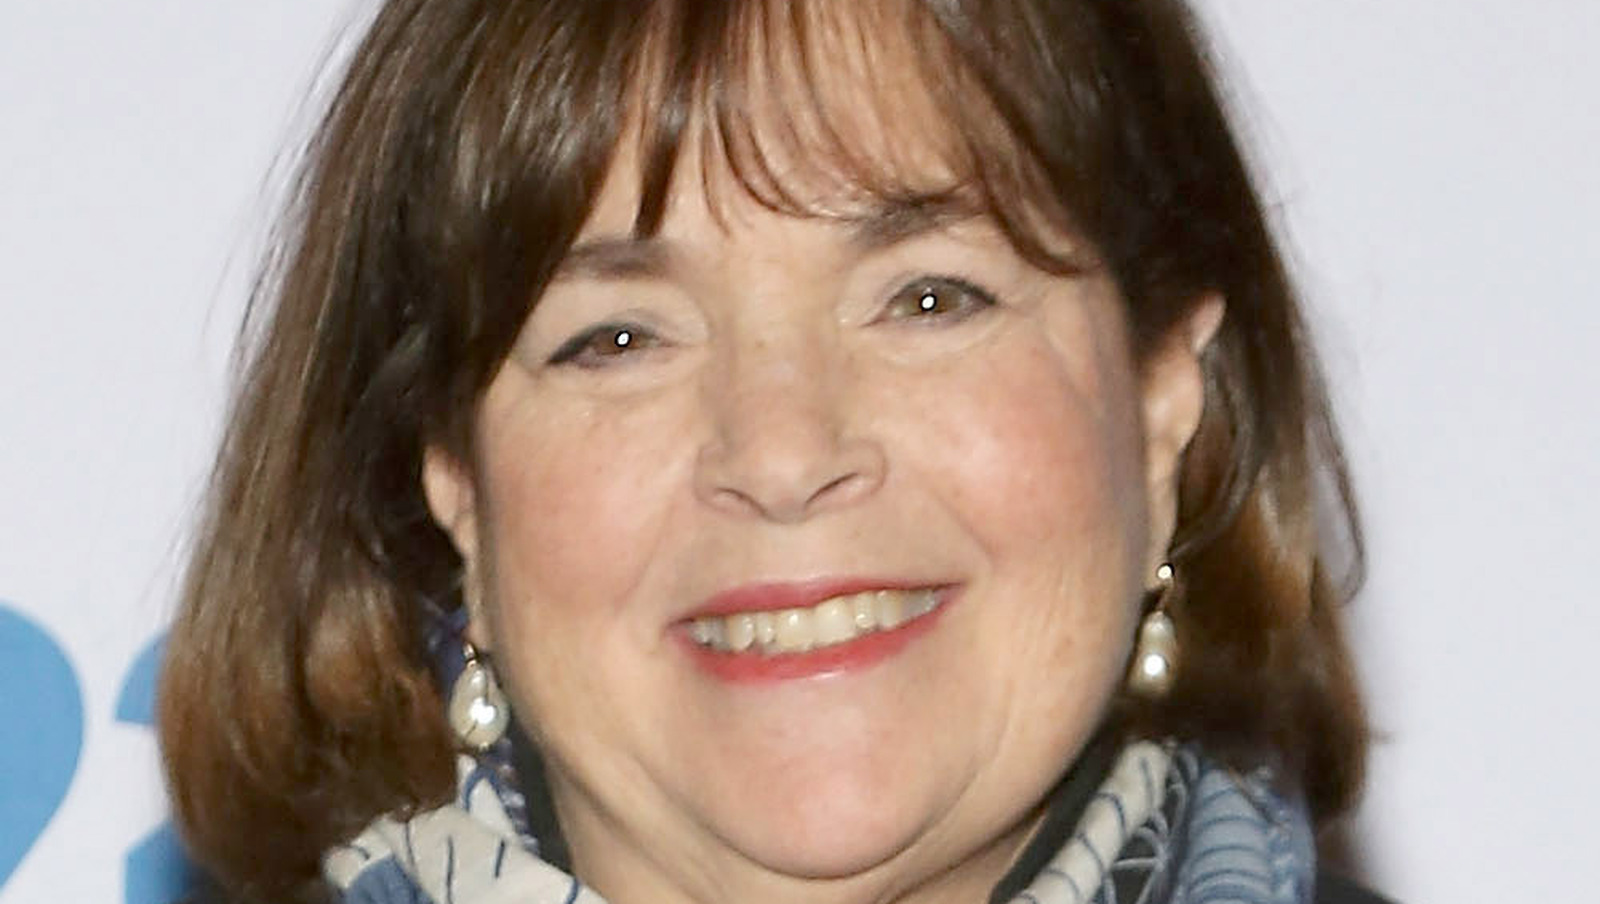 The Refreshing Ingredient Ina Garten Adds To Puréed Potatoes